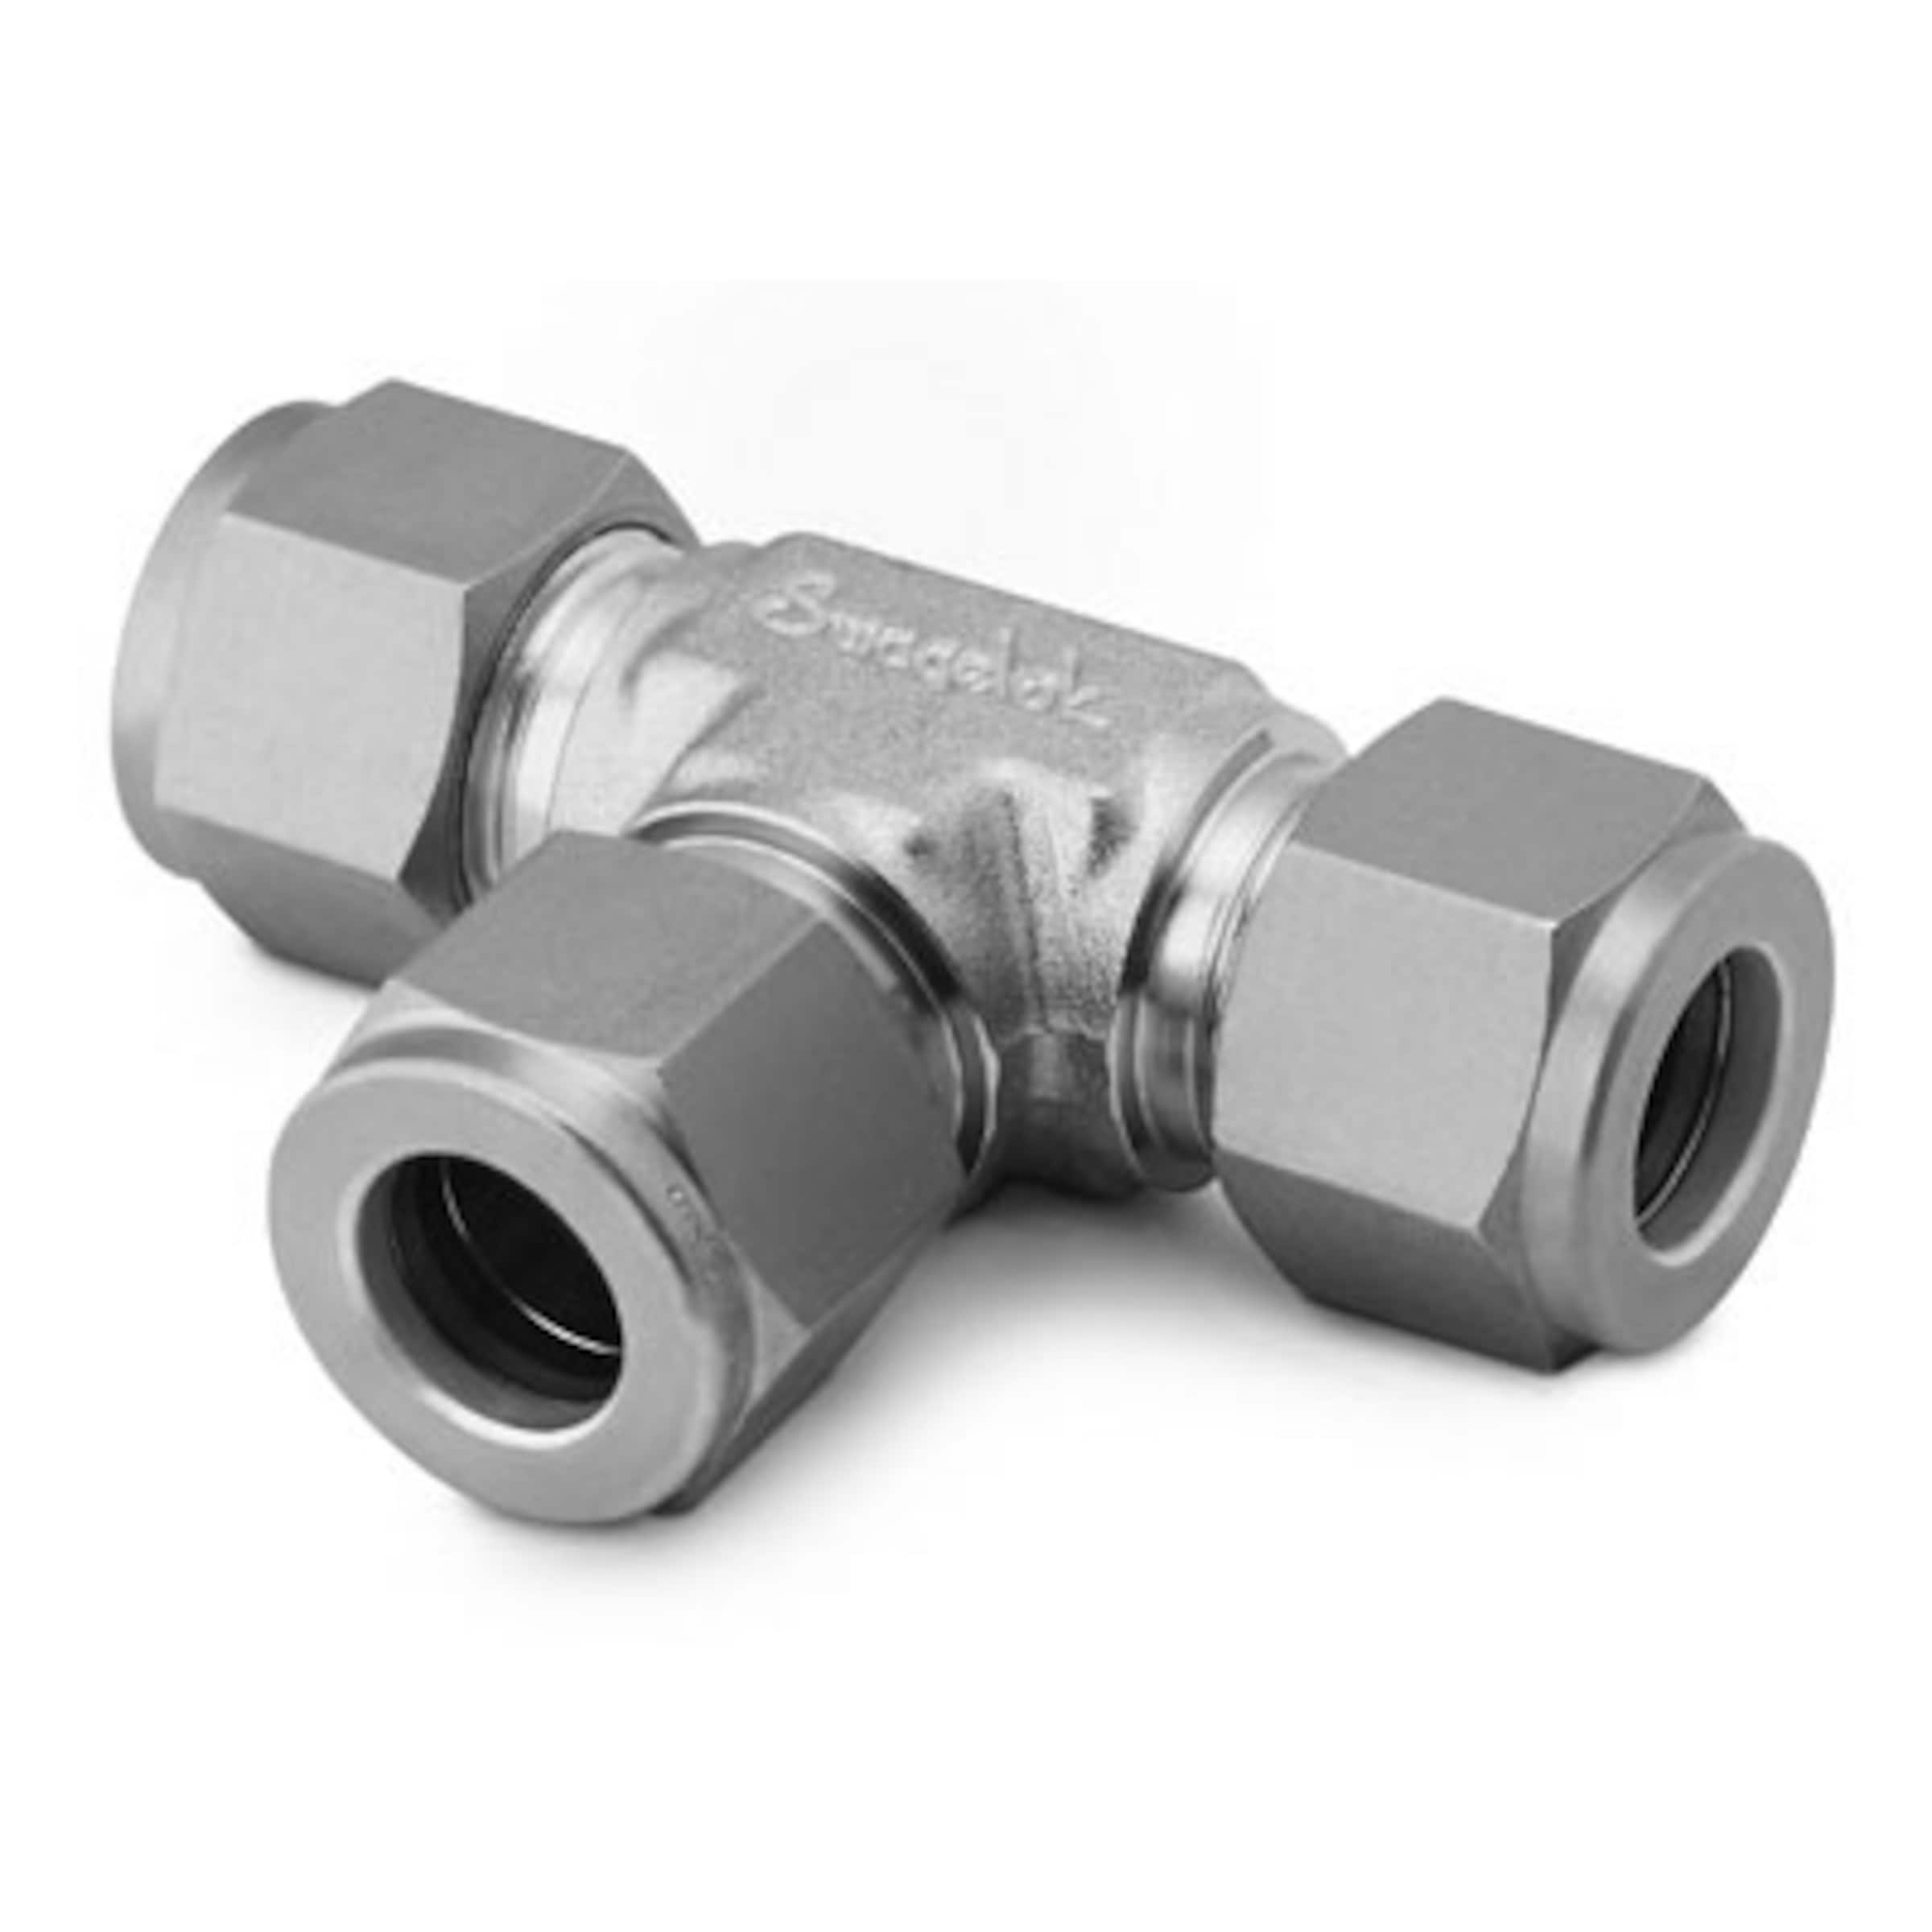 Stainless Steel Swagelok Tube Fitting, Union Tee, 1/4 in. Tube OD